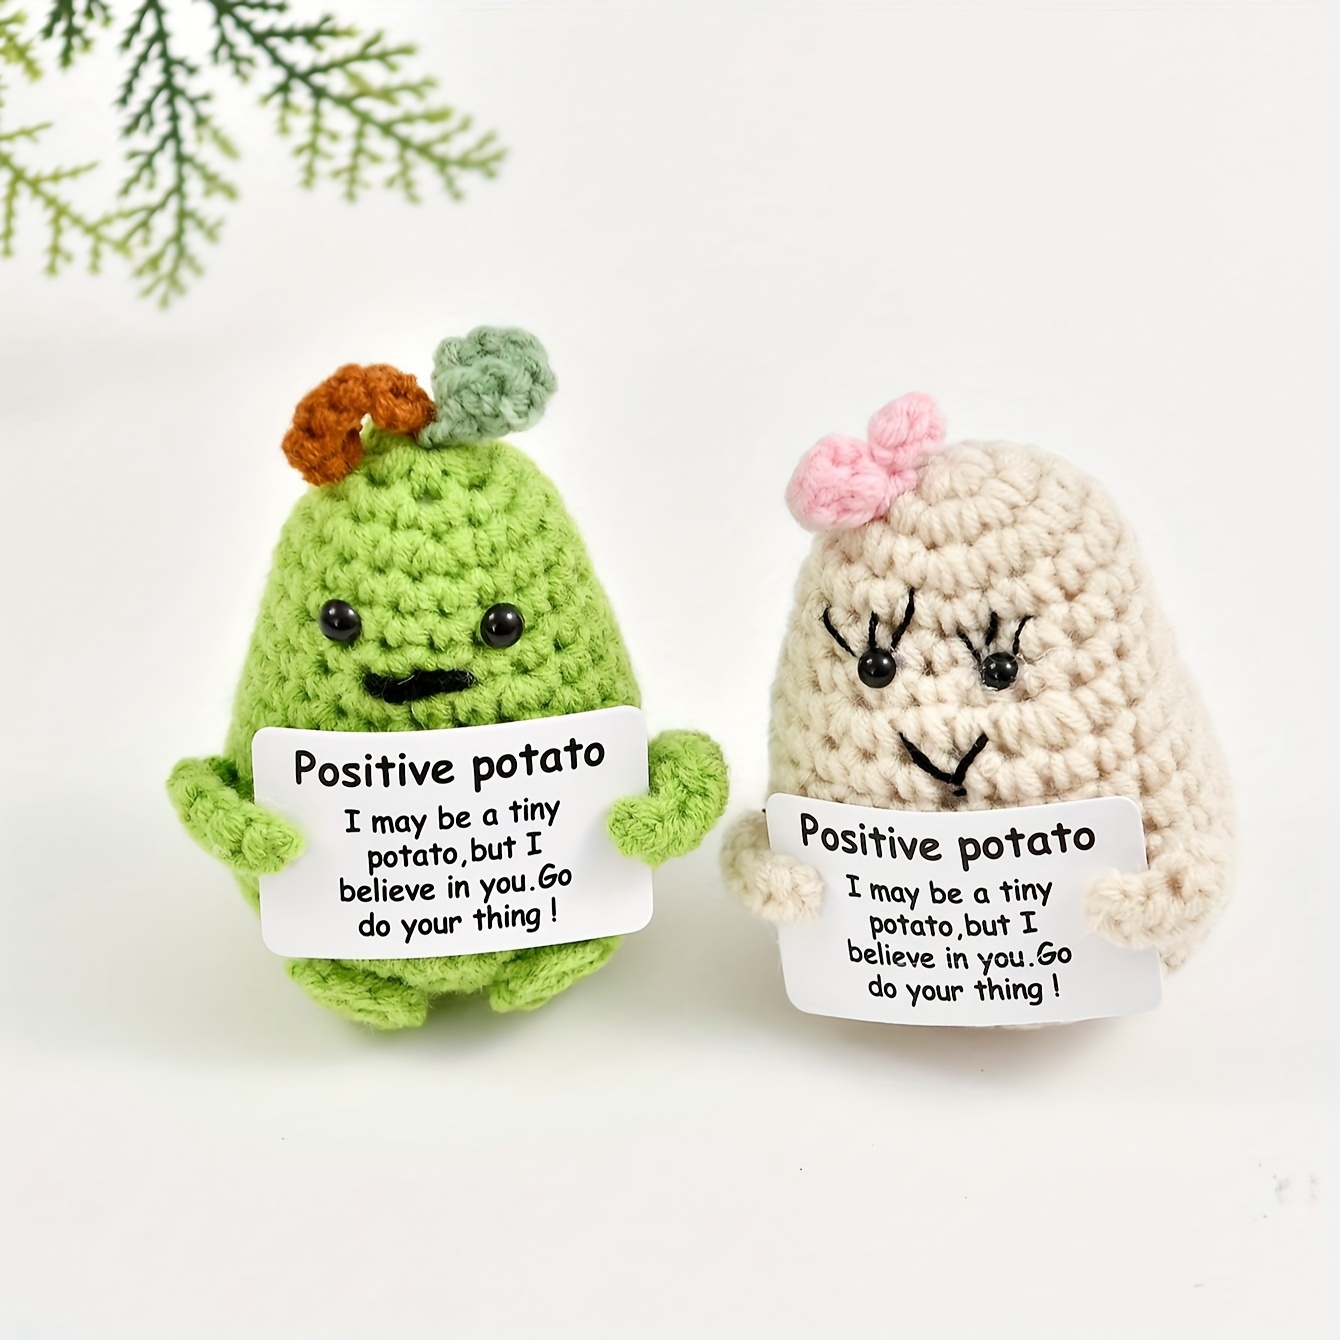 TOYMIS Funny Positive Potato, 3 Inch Cute Creative Knitted Positive Potato  Interesting Wool Potato Doll for Party Decorations Birthday Encouragement